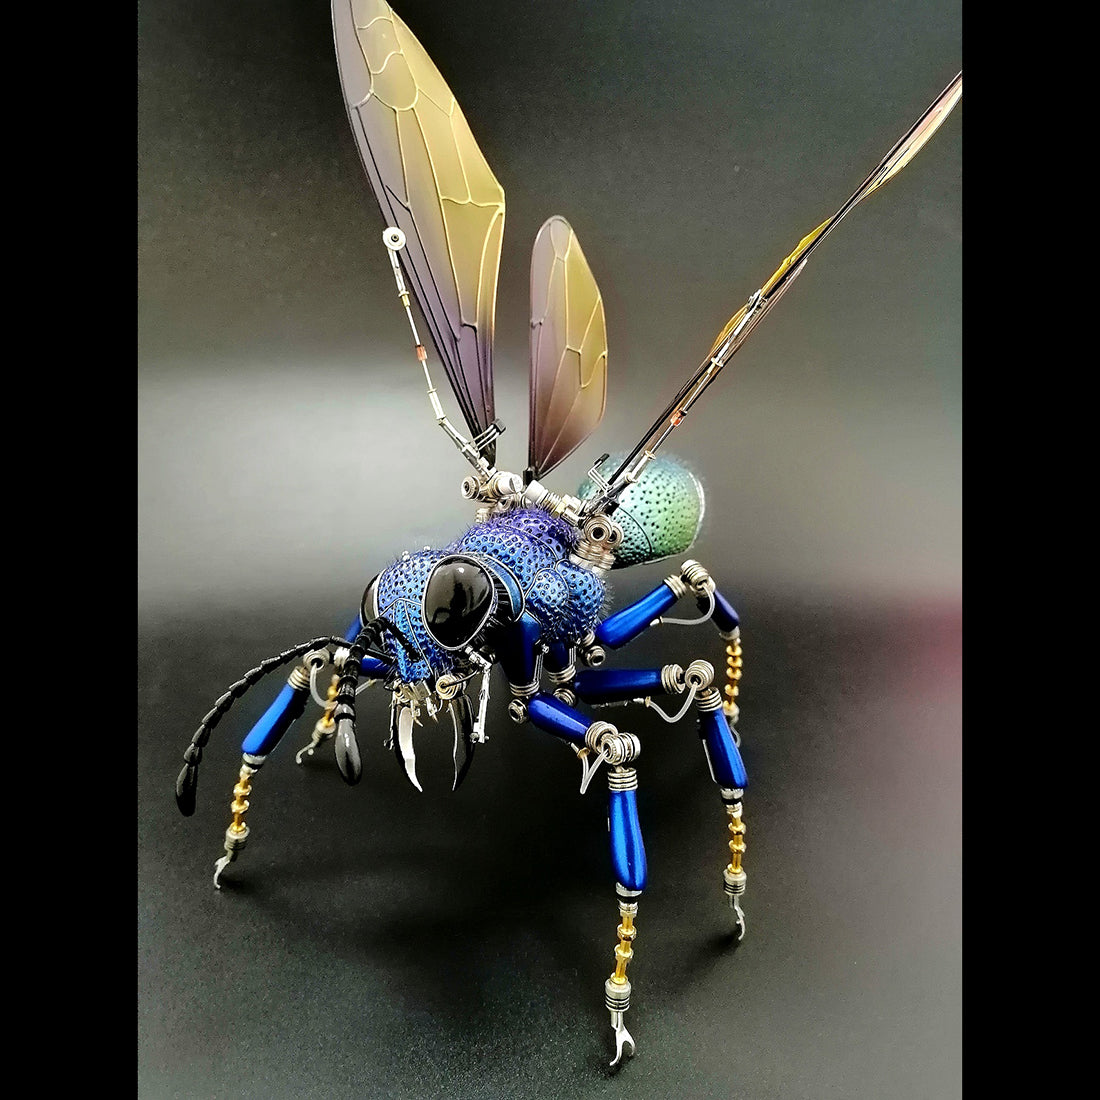 Cuckoo Wasp Metal Steampunk Sculpture Model Kits Crafts for Home Collection Display